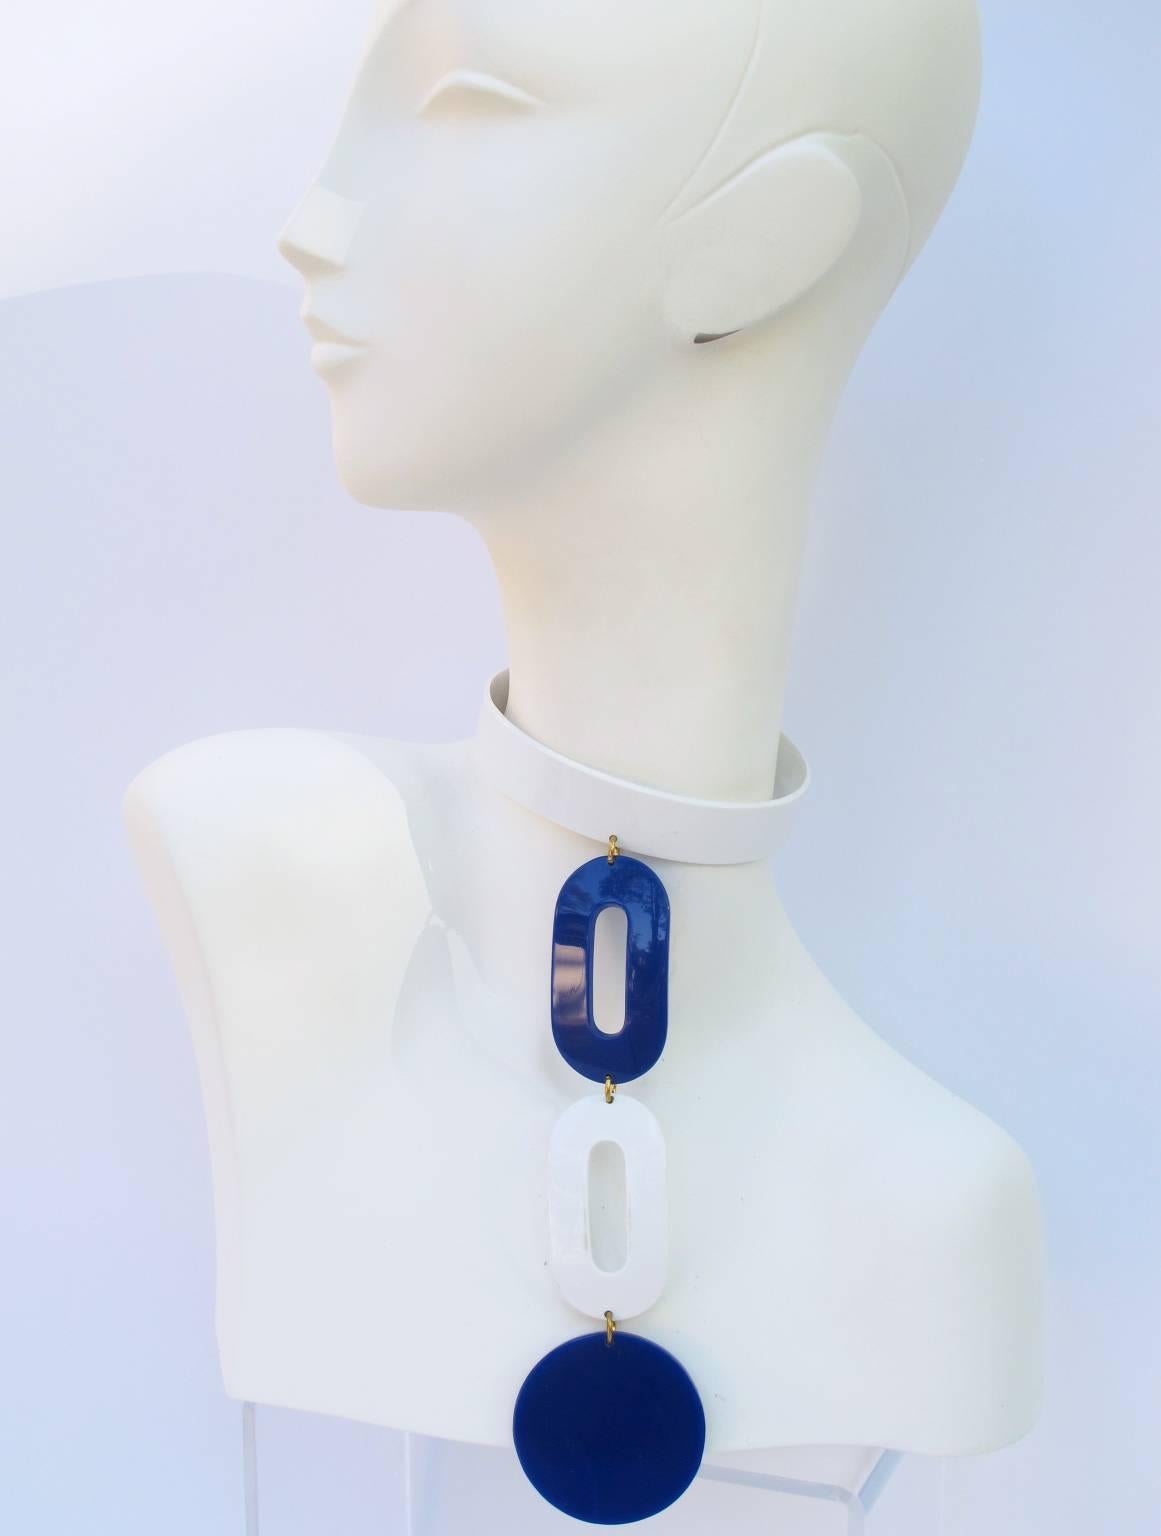 Rare French designer Andre Courreges geometric shaped, mod blue and white dog collar necklace. Space age choker features different sized linked cut-out plastic ovals and disc. Unsigned. Please note collar will fit small size neck.
Measurements: